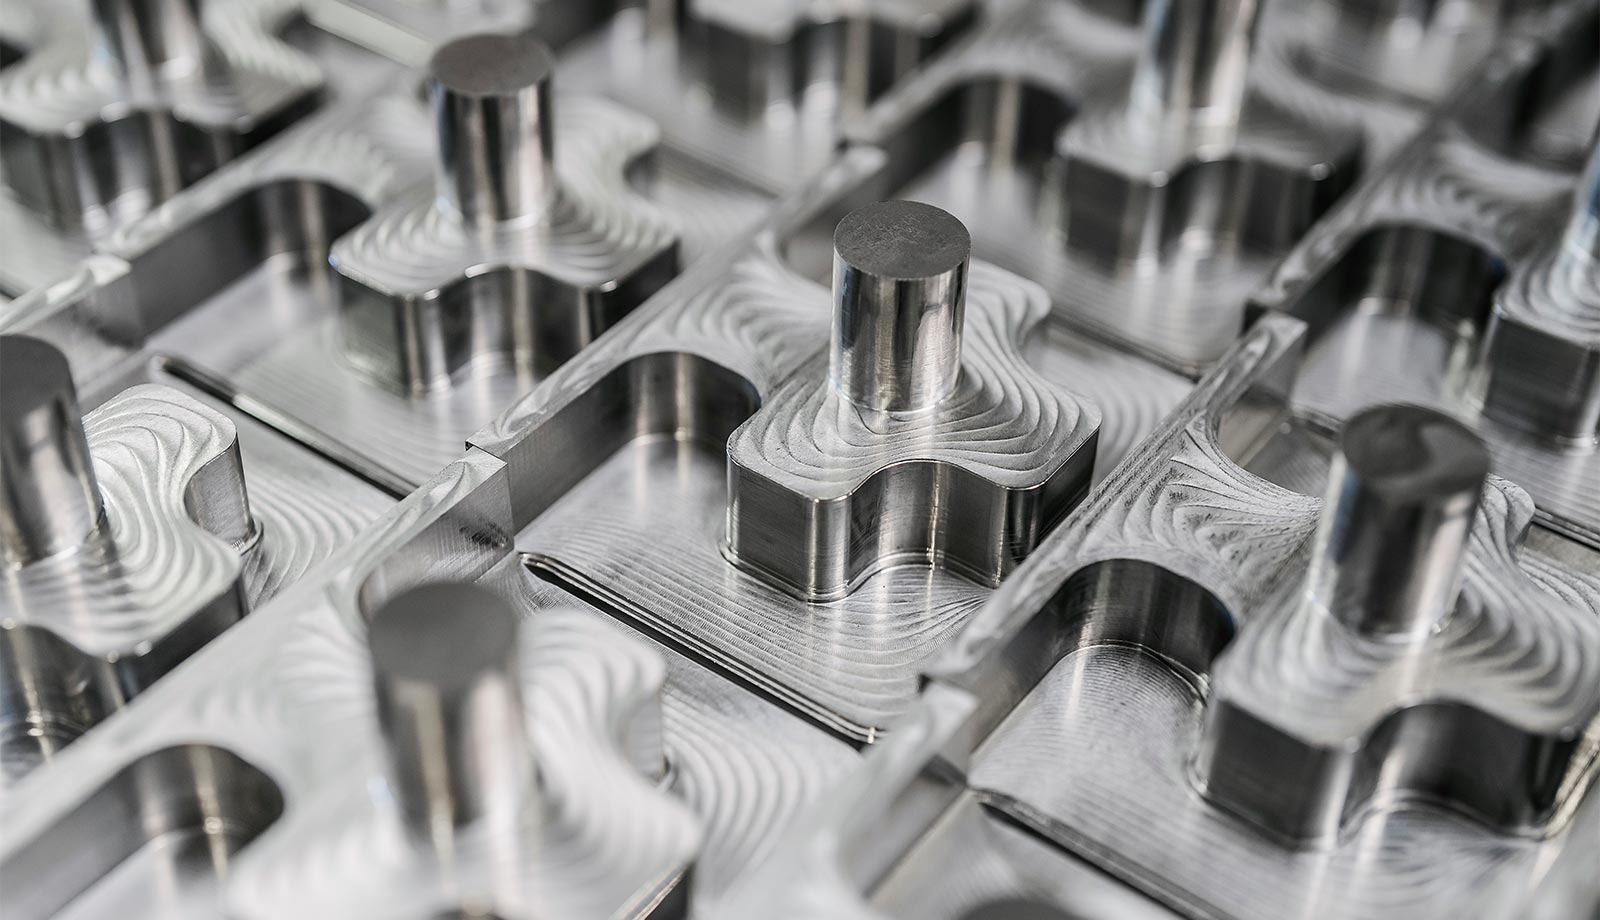 Various materials for cubic CNC manufacturing at Biltec: steel, aluminum, and stainless steel. The materials symbolize the versatility and quality of the processing options.